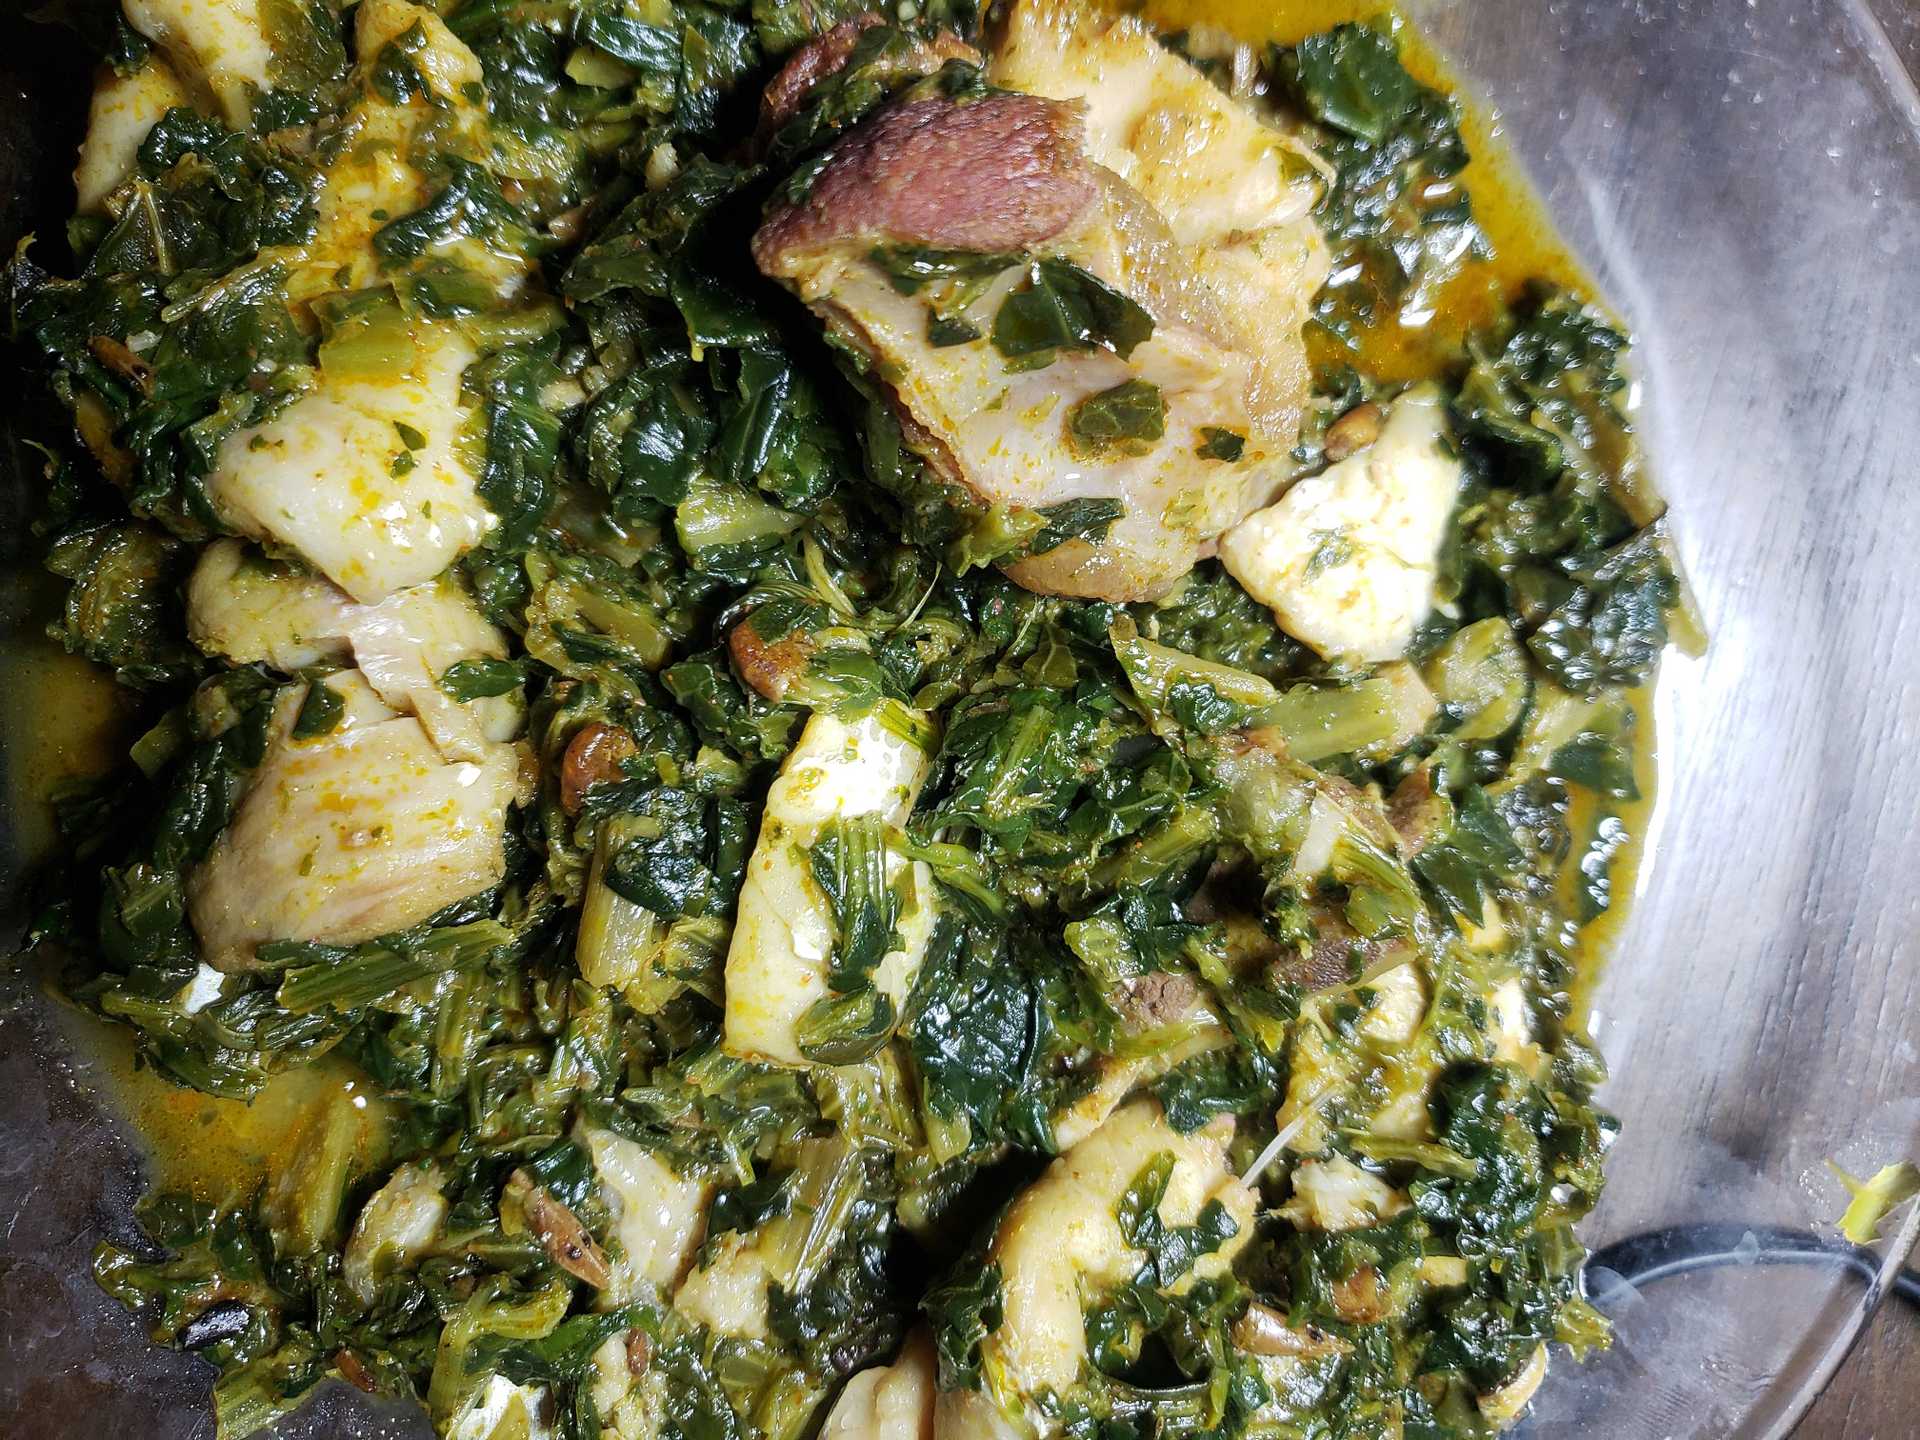 A dish of spinach and chunks of fish in a bowl.